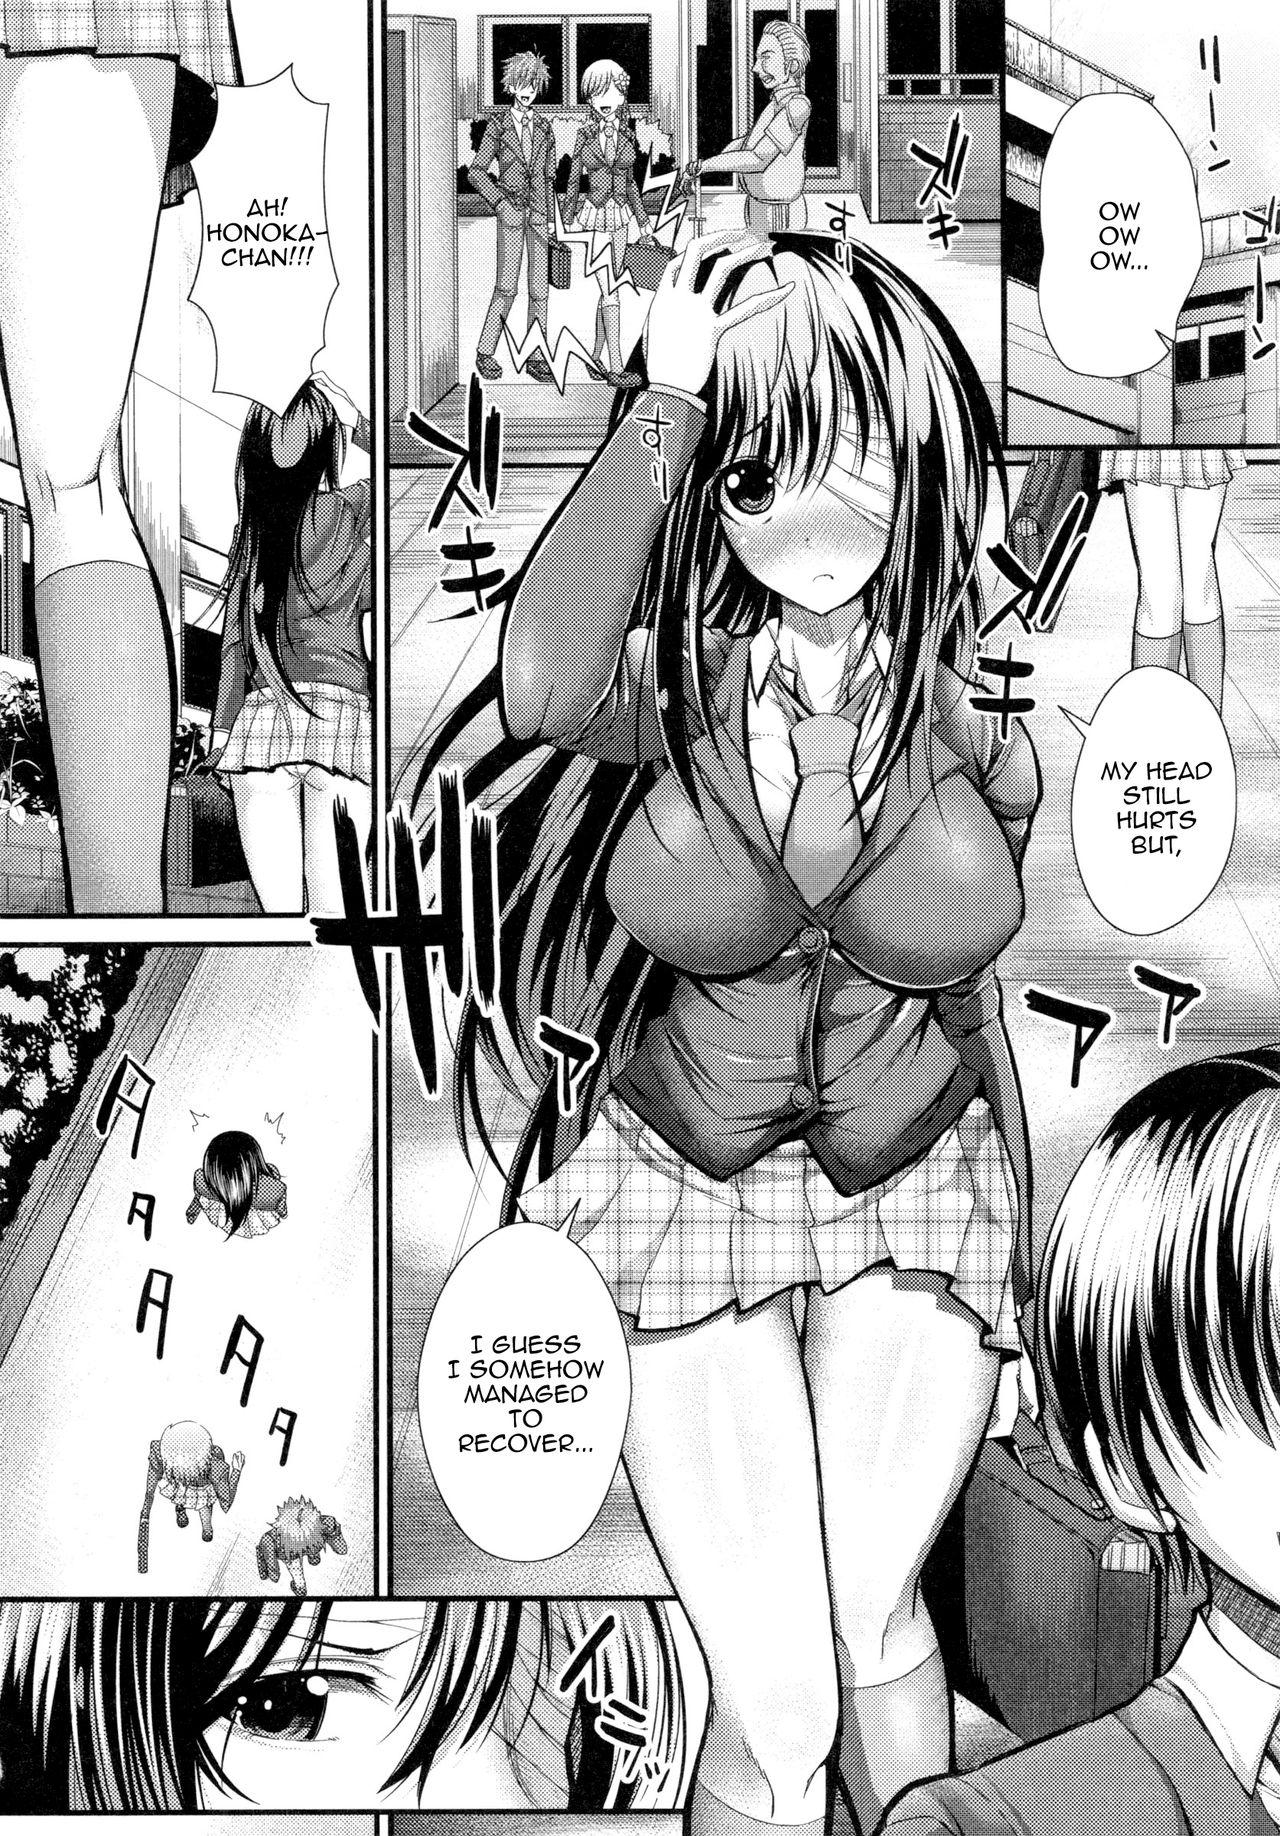 First Ai no Kyouen | Banquet of Love Perfect Girl Porn - Page 4